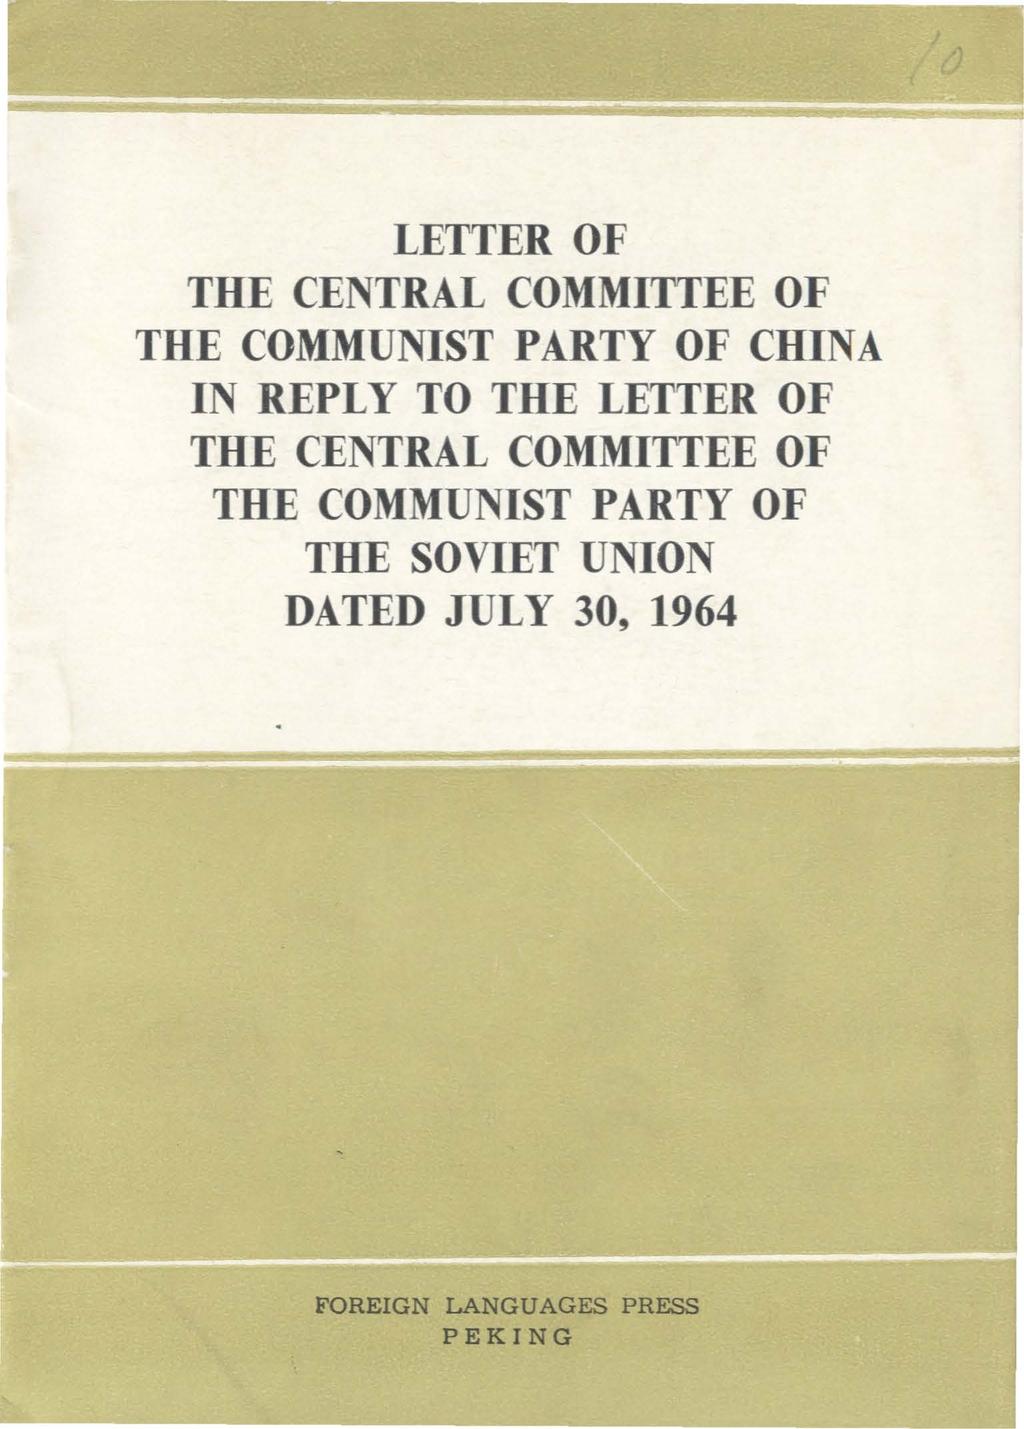 LETTER OF THE CENTRAL COMMITTEE OF THE COMMUNIST PARTY OF CIDNA IN REPLY TO THE LETTER OF THE CENTRAL